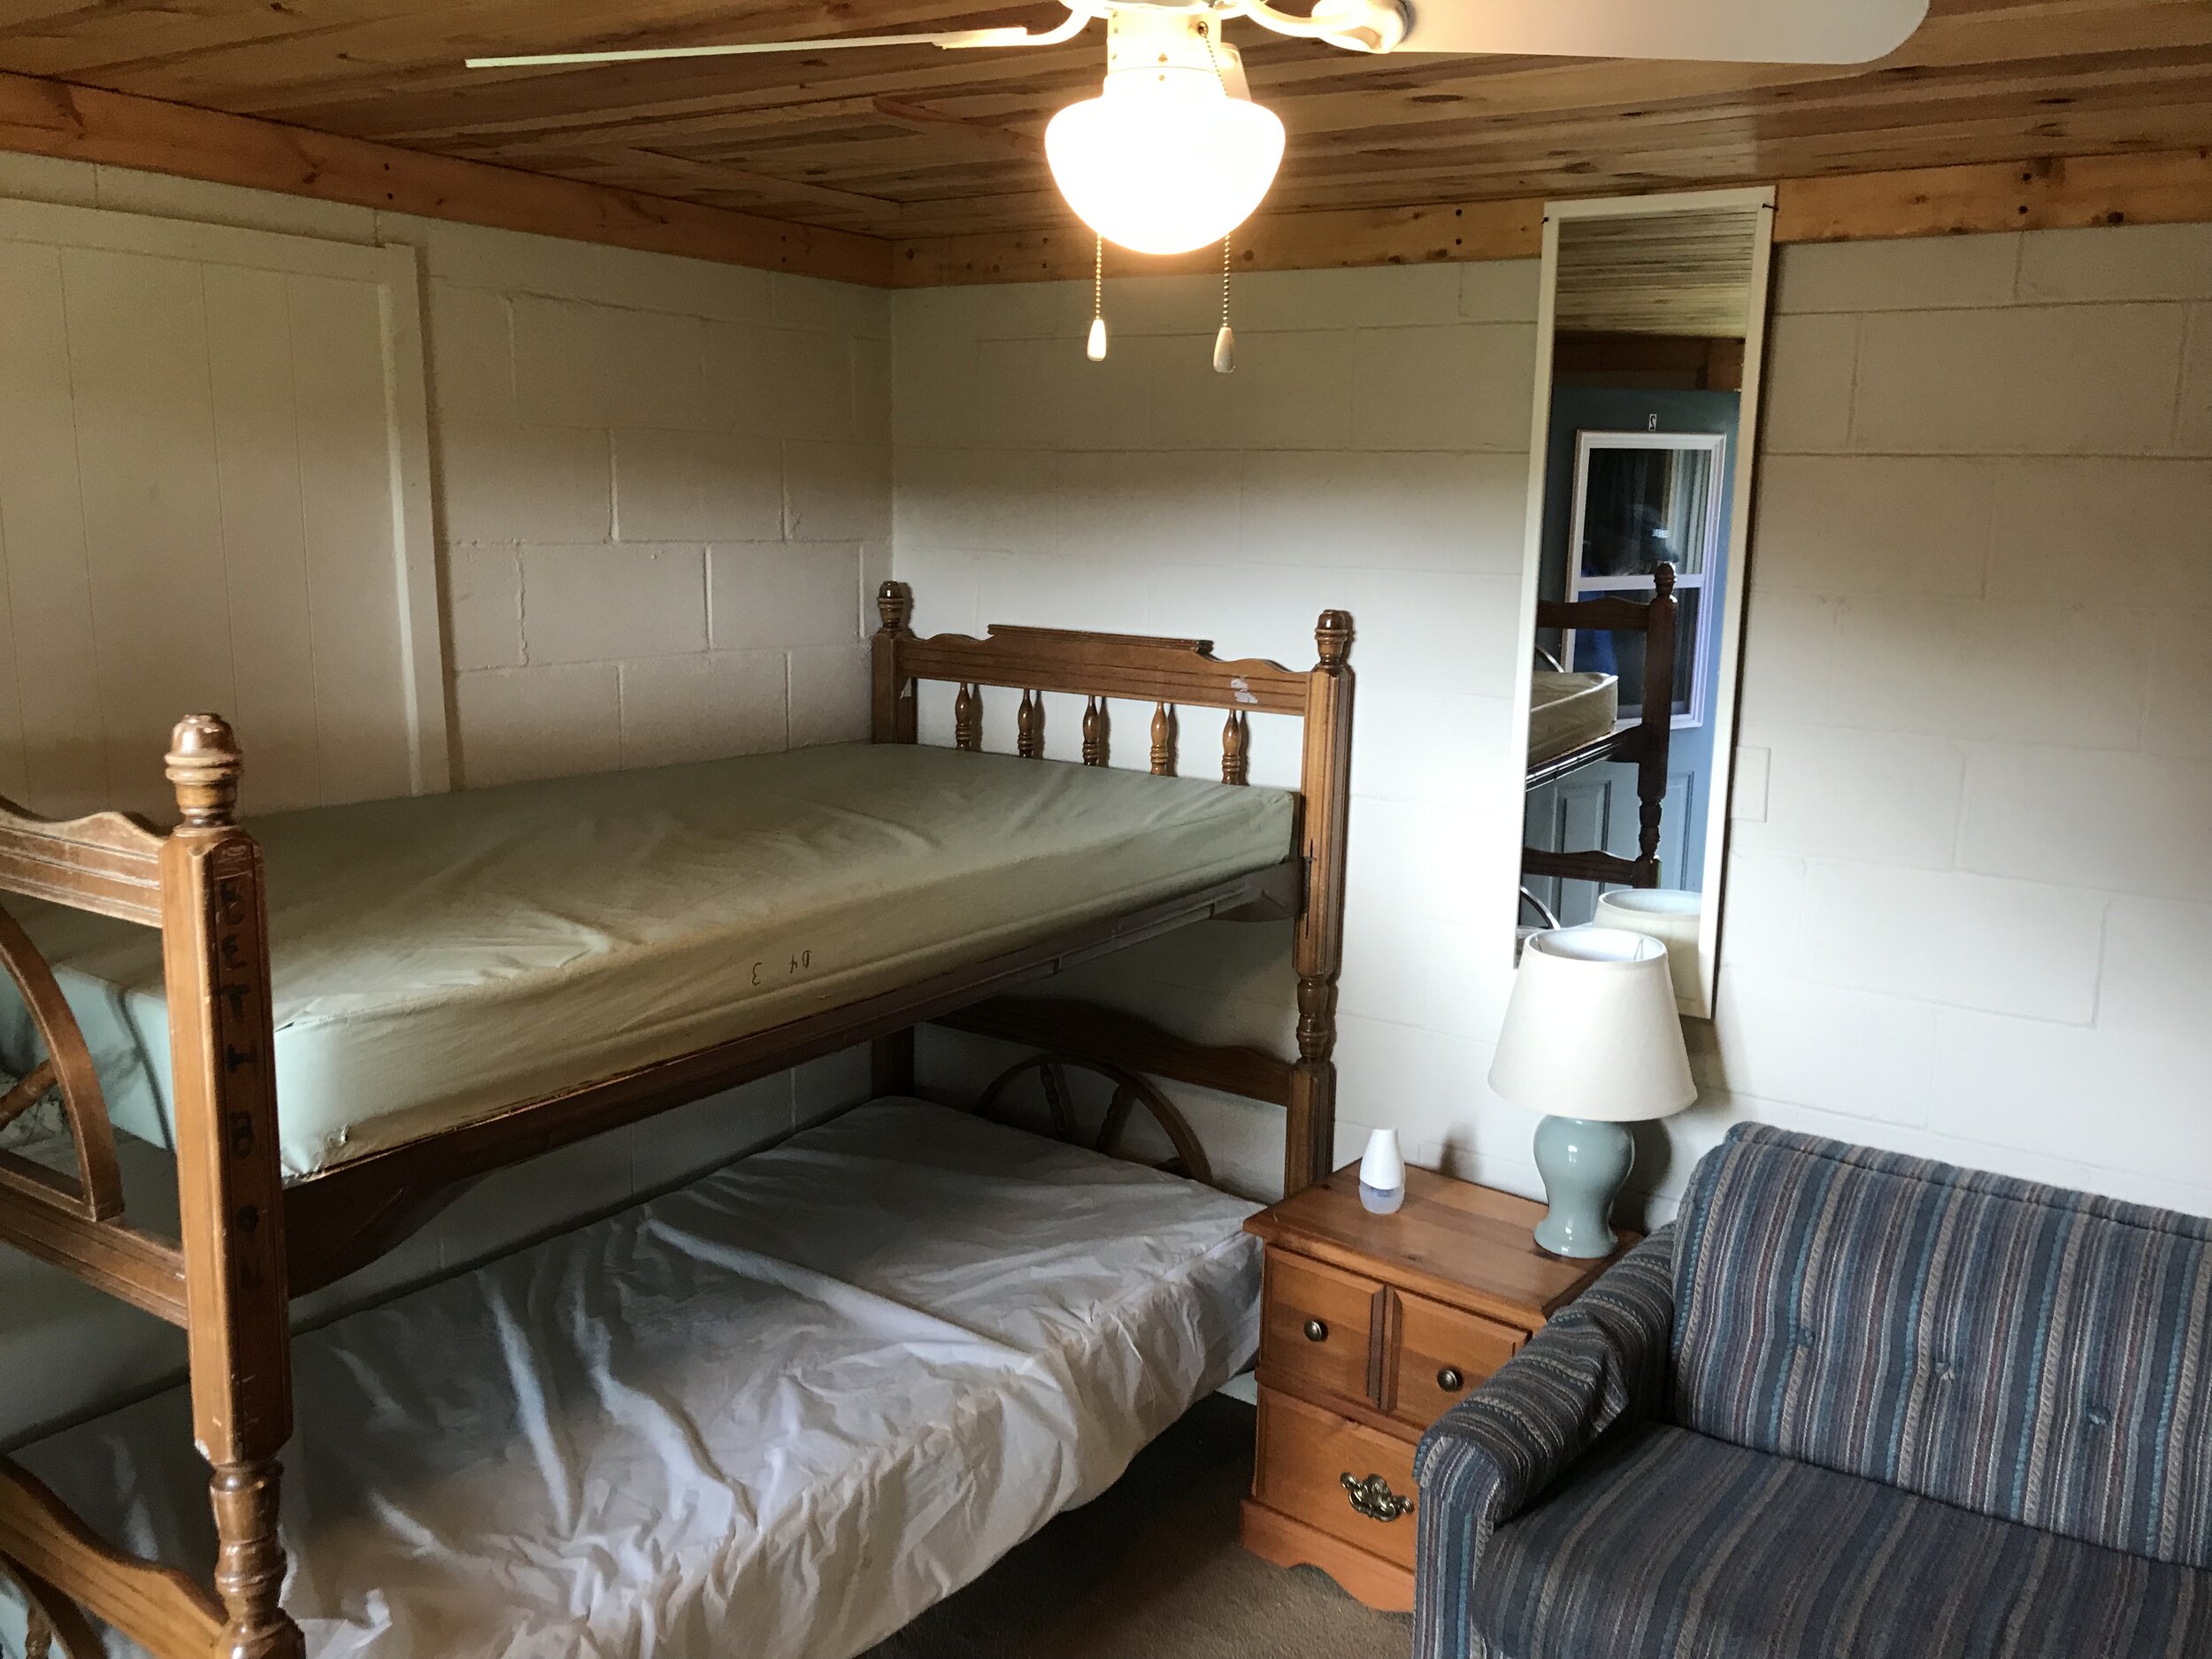  Private rooms range from King, queen, full, and bunk beds with anywhere from 1-5 beds per room. Many rooms feature a couch, desk, closet wardrobe, minifridge, and more. All sleeping quarters are air conditioned.  